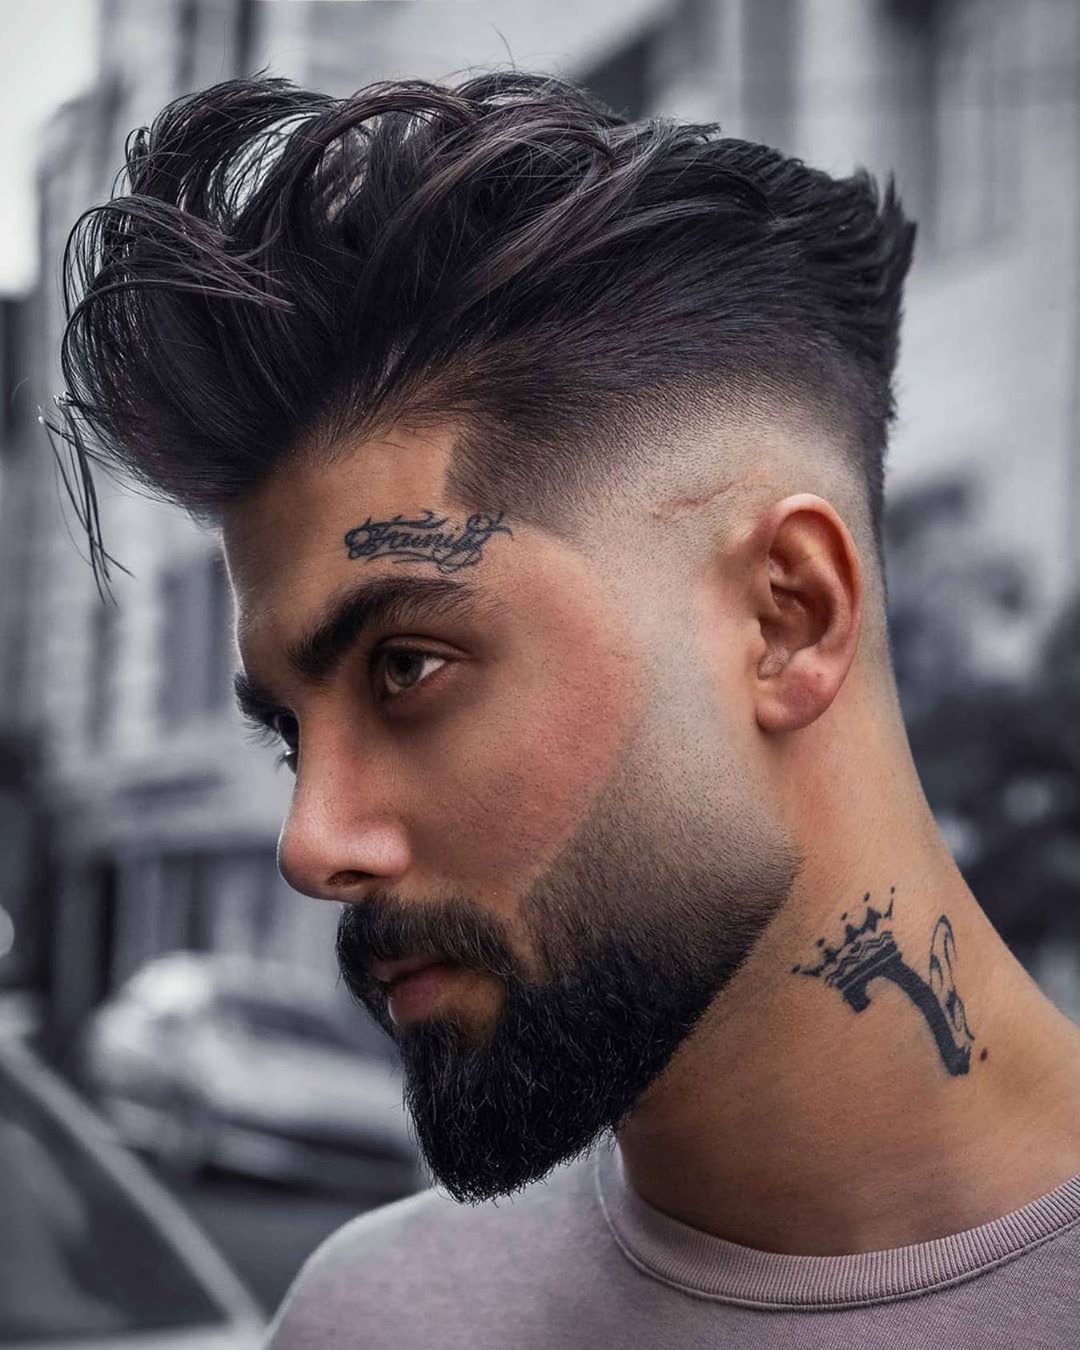 60 Best Young Men's Haircuts  The latest young men's 